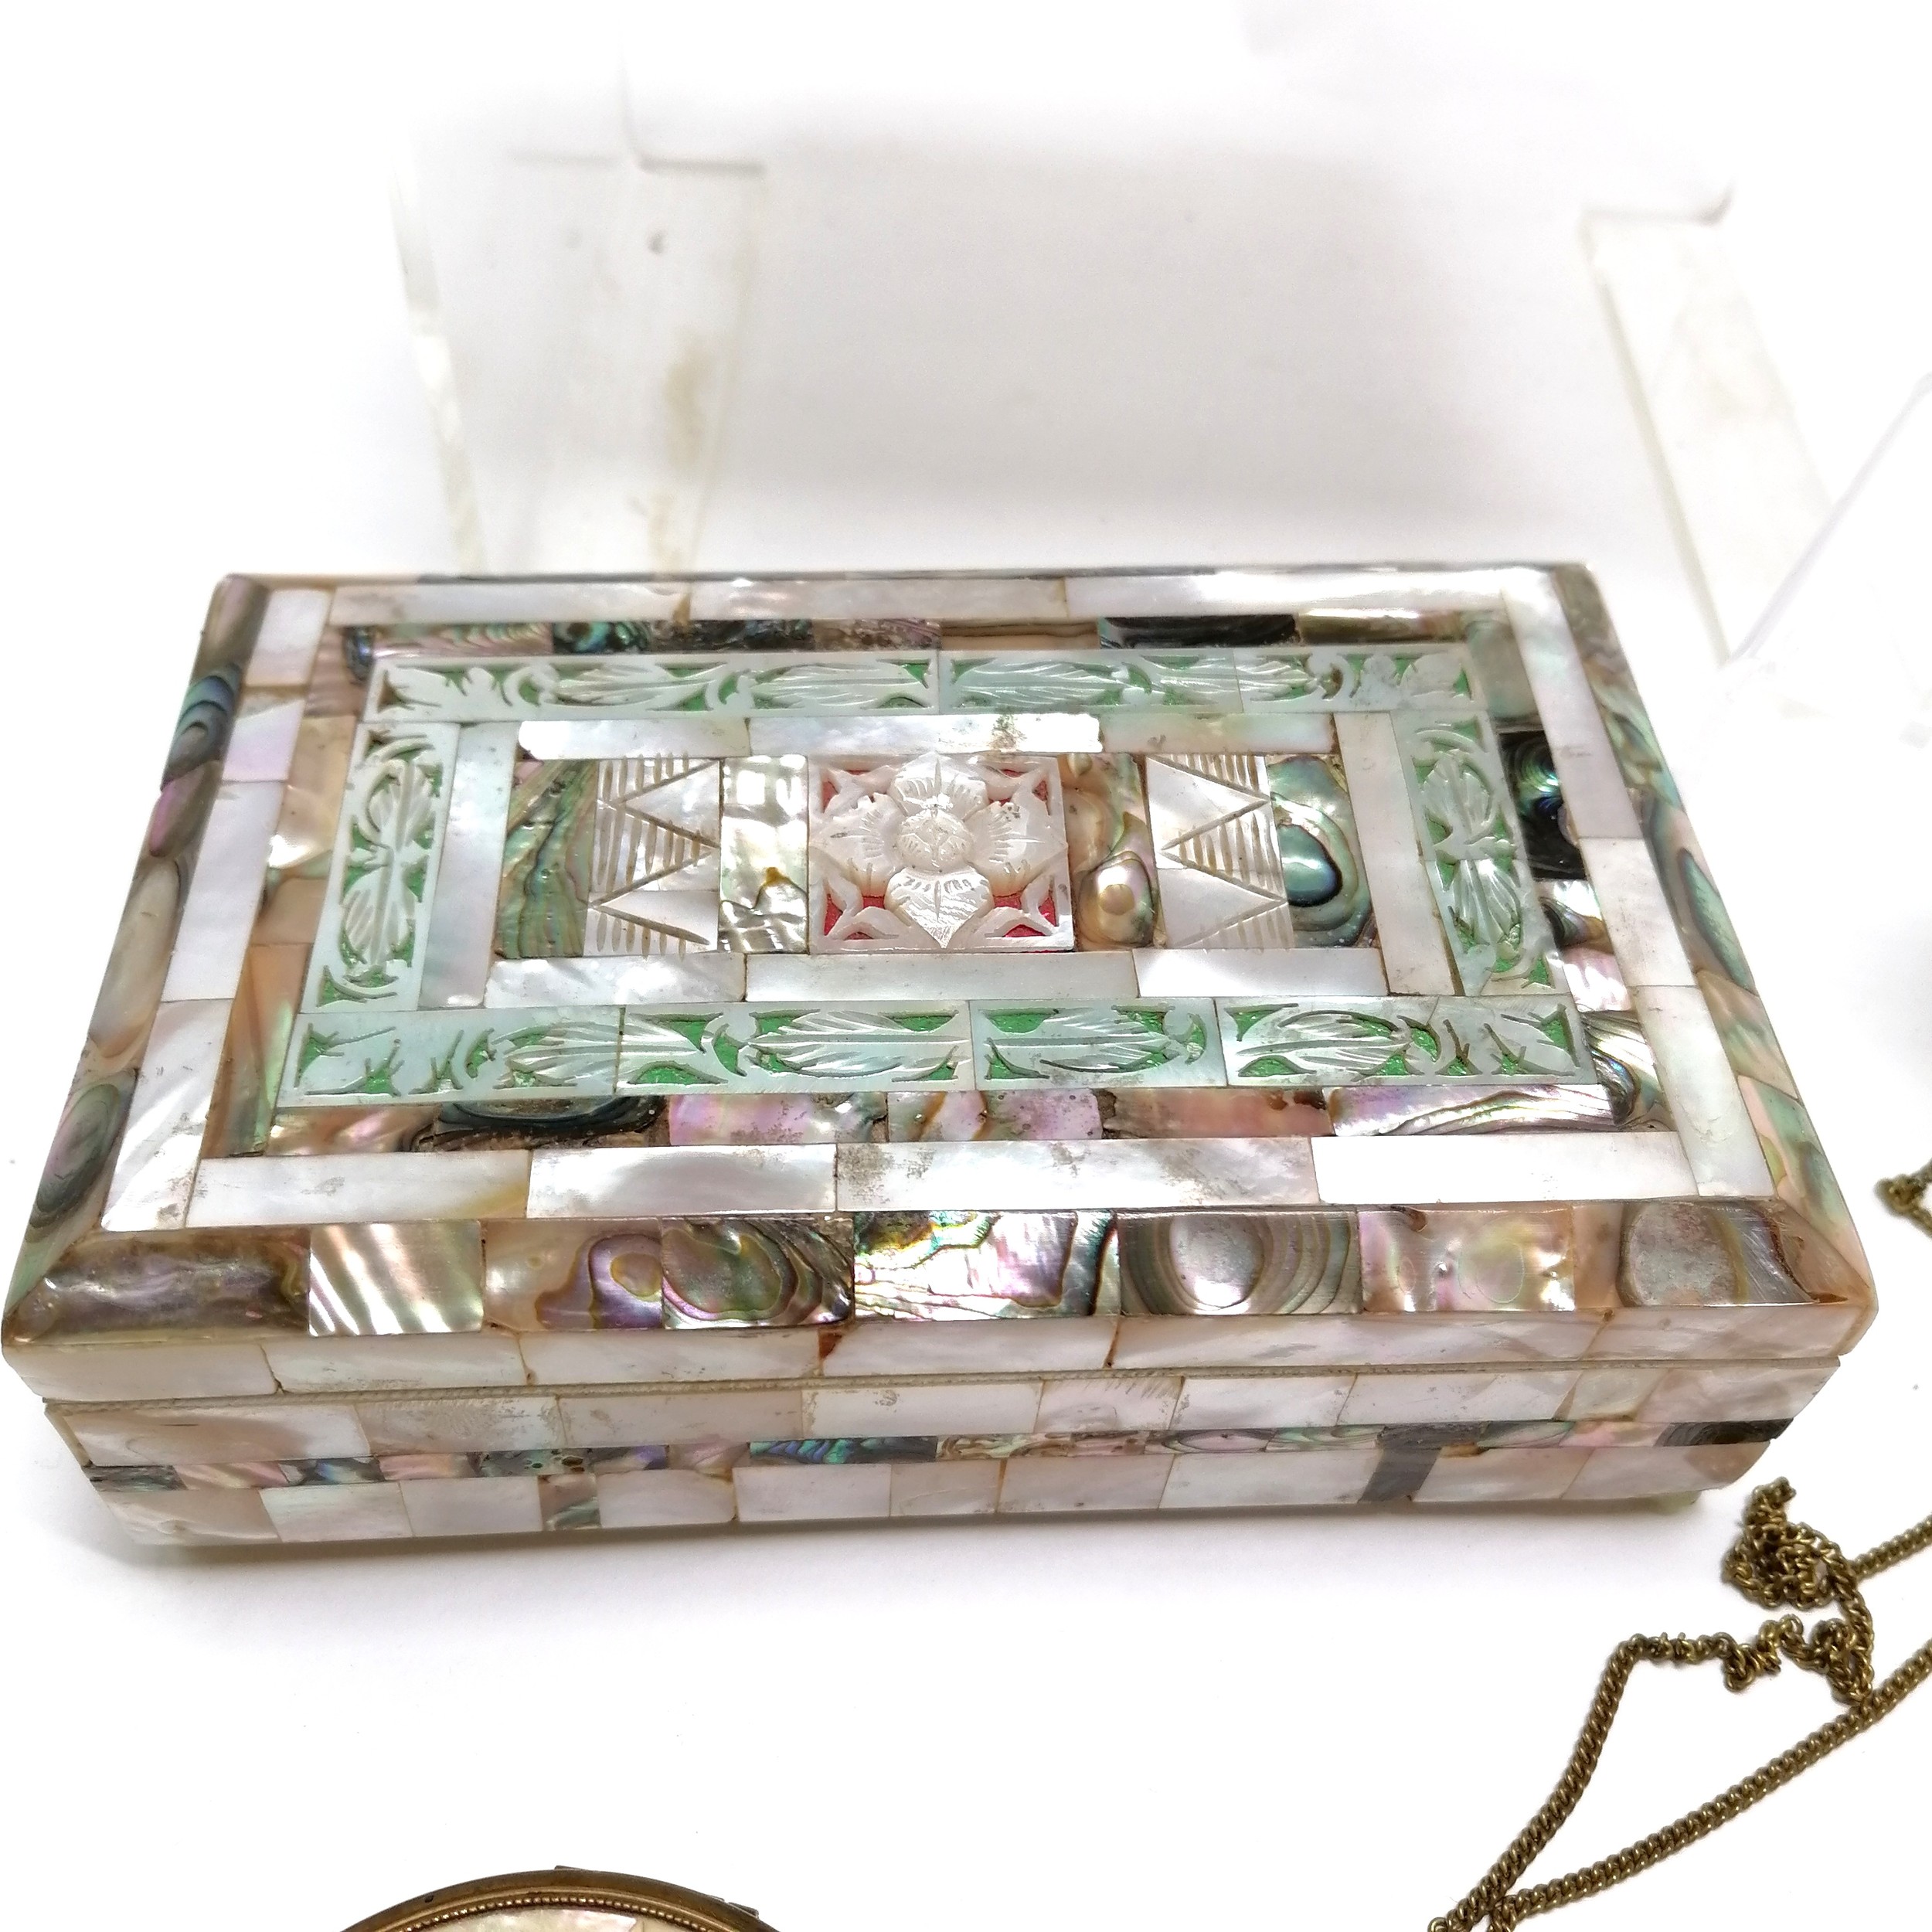 2 x mother of pearl / paua shell decorated boxes - largest 17cm x 13cm x 5.5cm and has some losses - Image 2 of 4